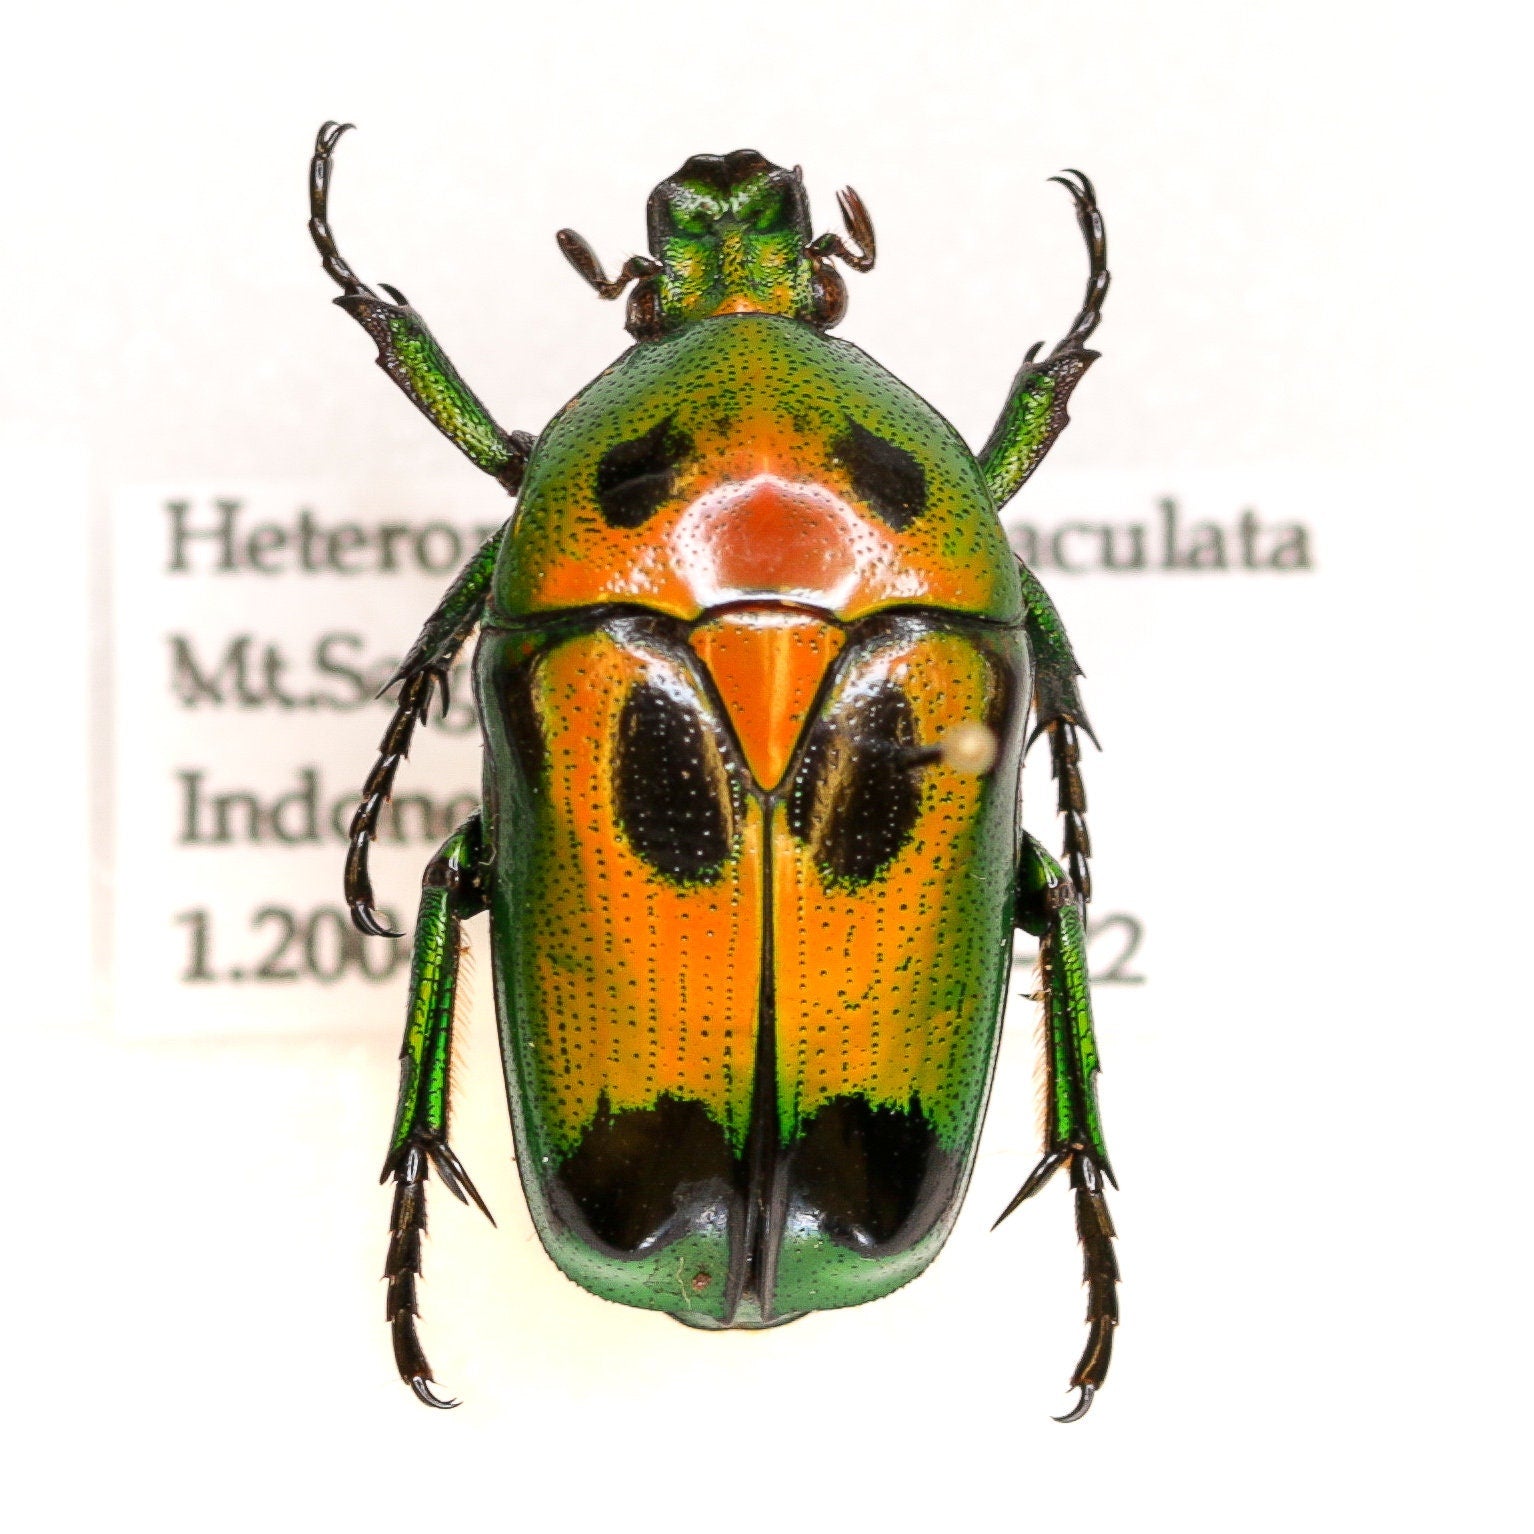 Real Beetle Collection | Pinned Entomology Insect Specimens and Data | Presented in a Gift Box